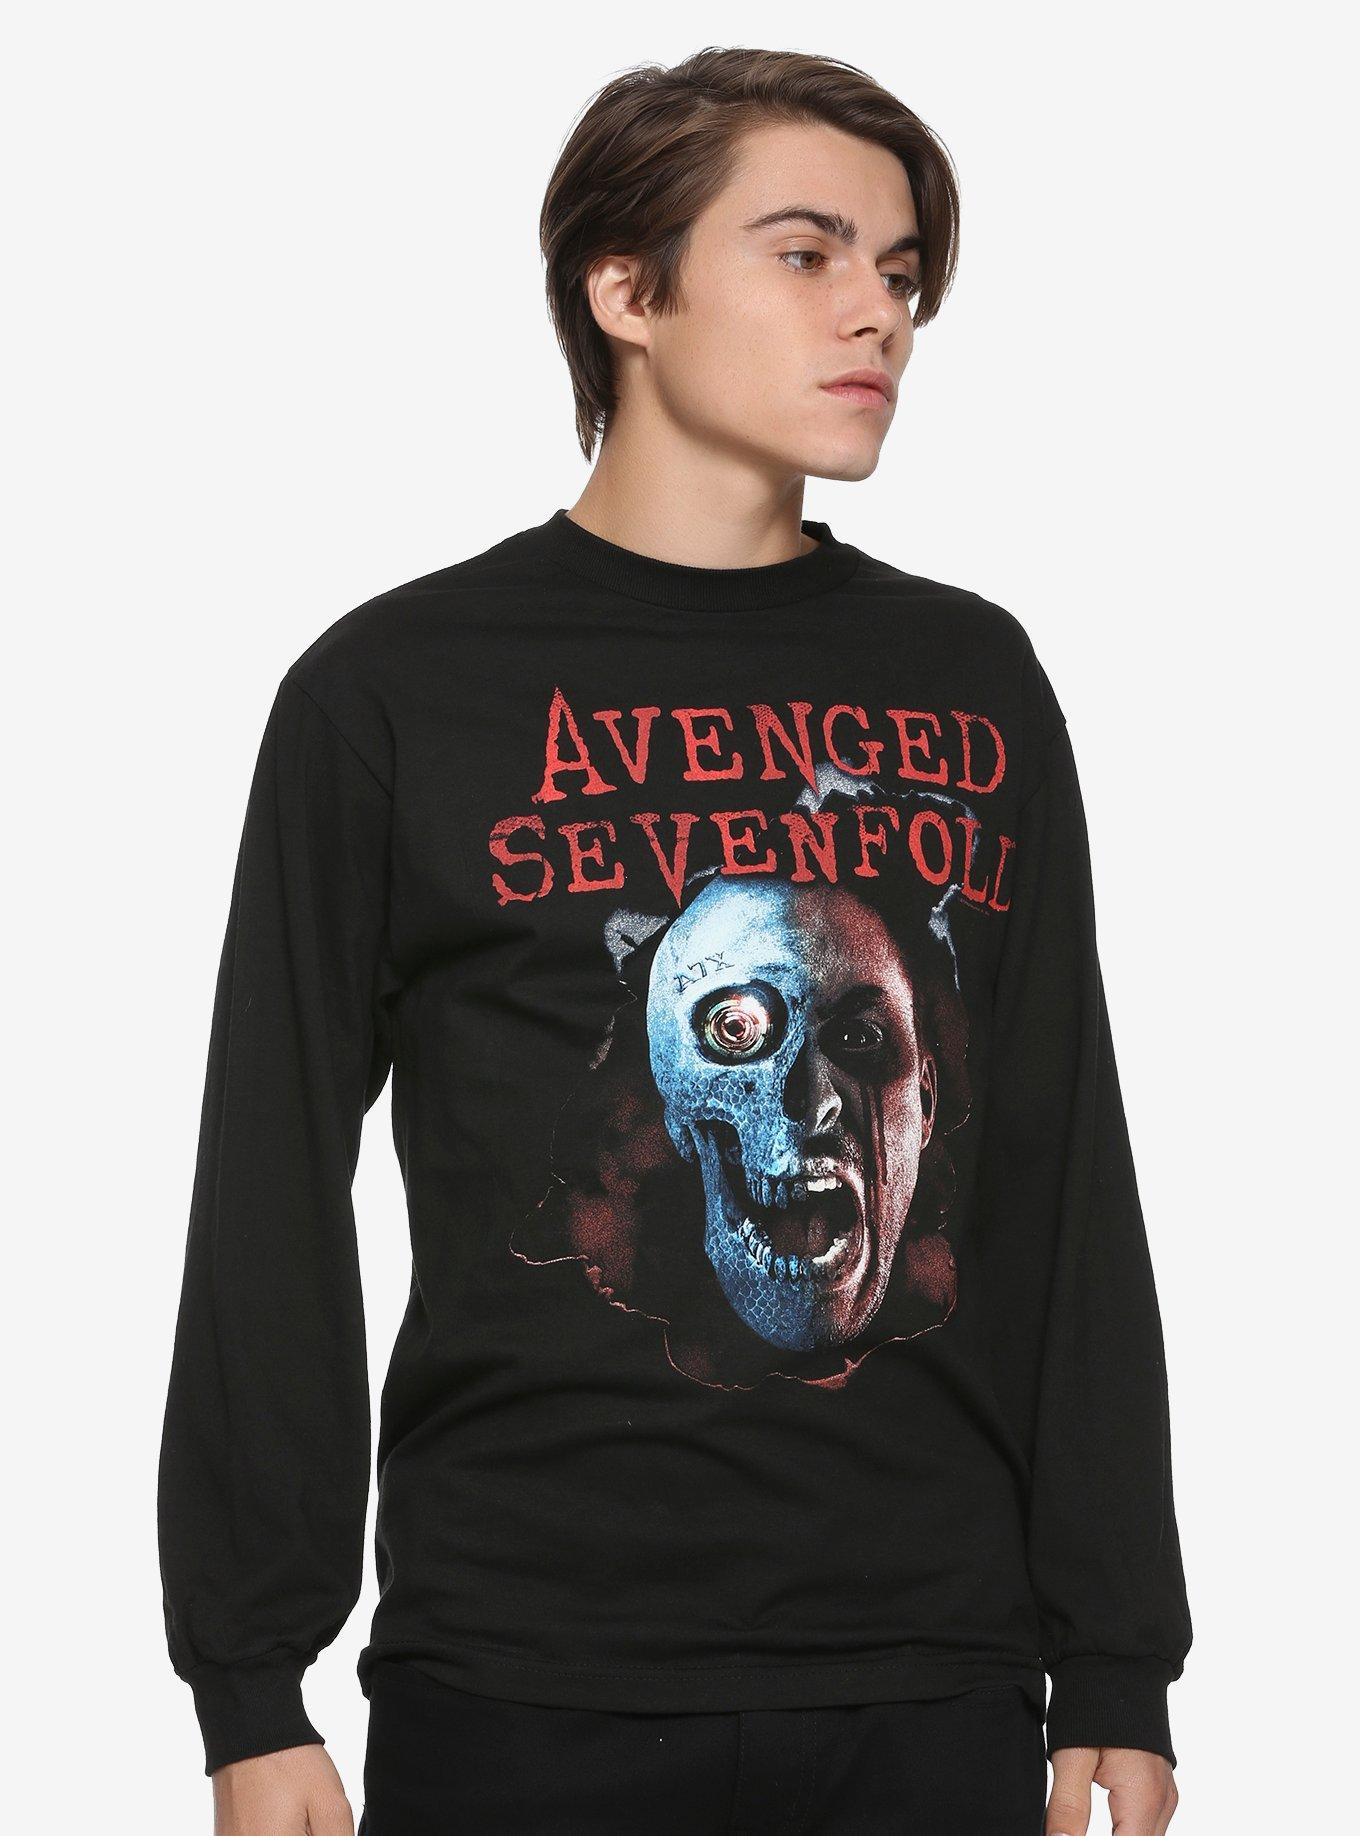 Avenged Sevenfold Two Faced Long-Sleeve T-Shirt, BLACK, hi-res